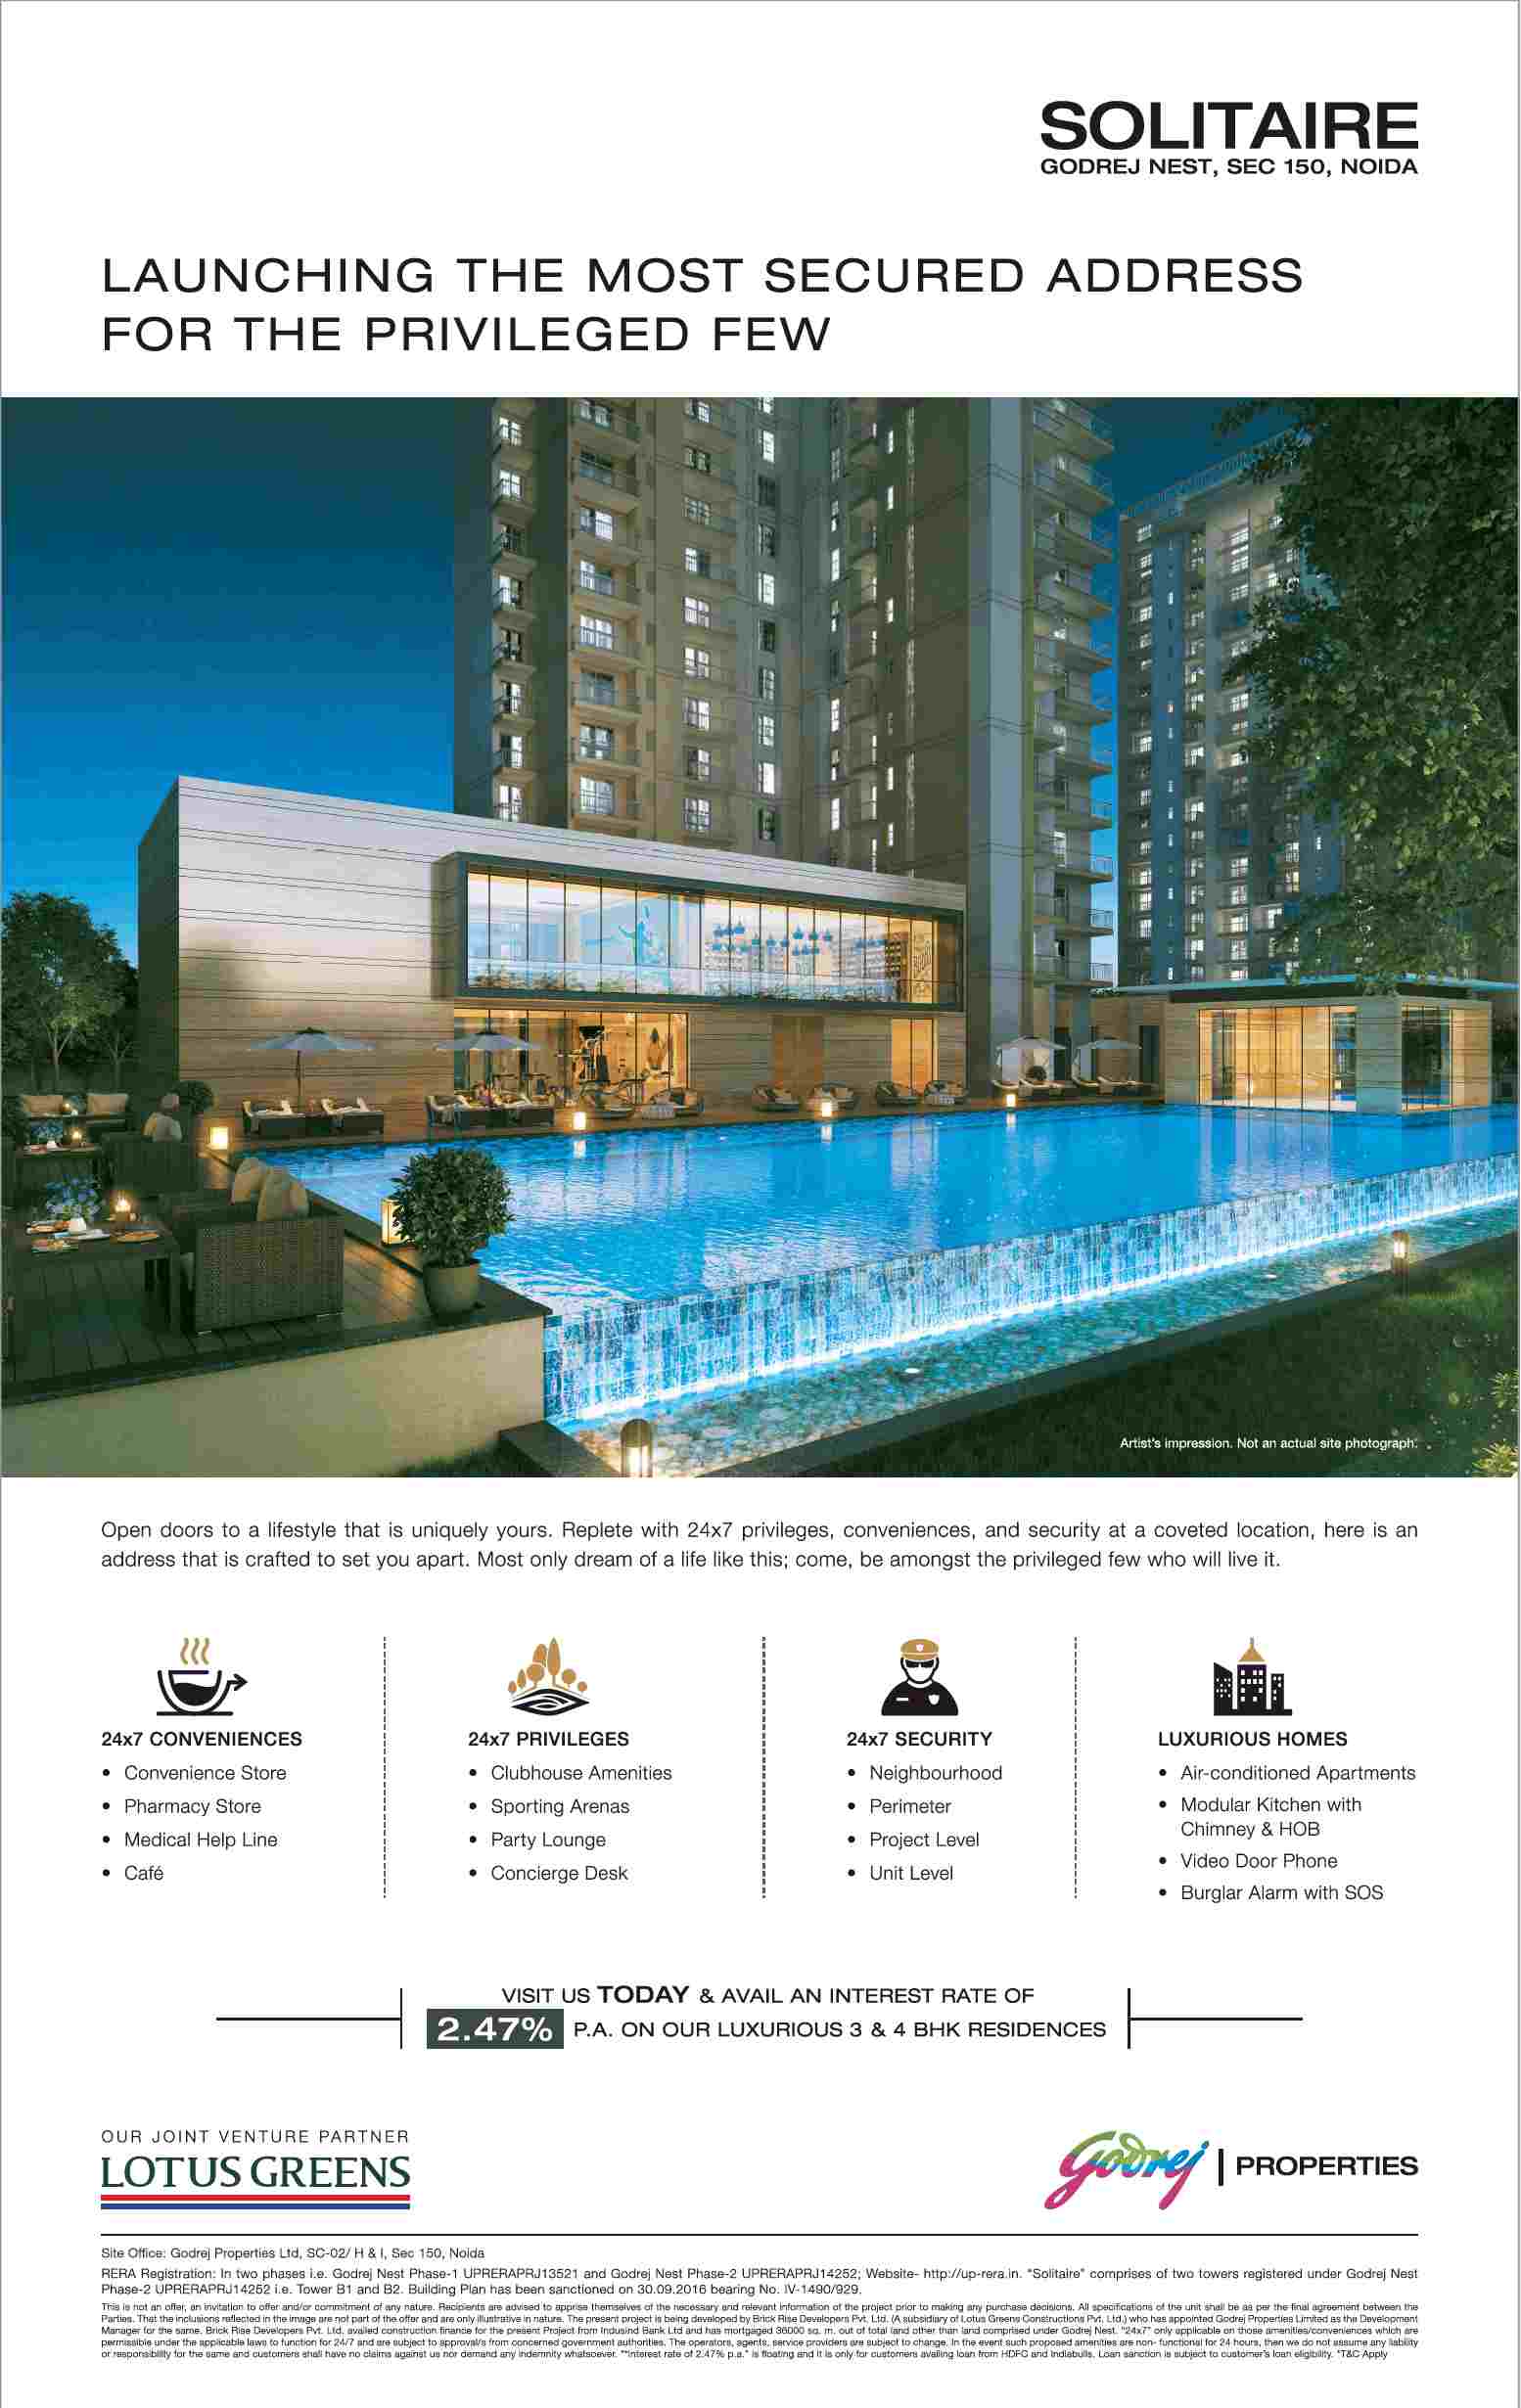 Launching Solitaire, the most secured address at Godrej Nest in Noida Update